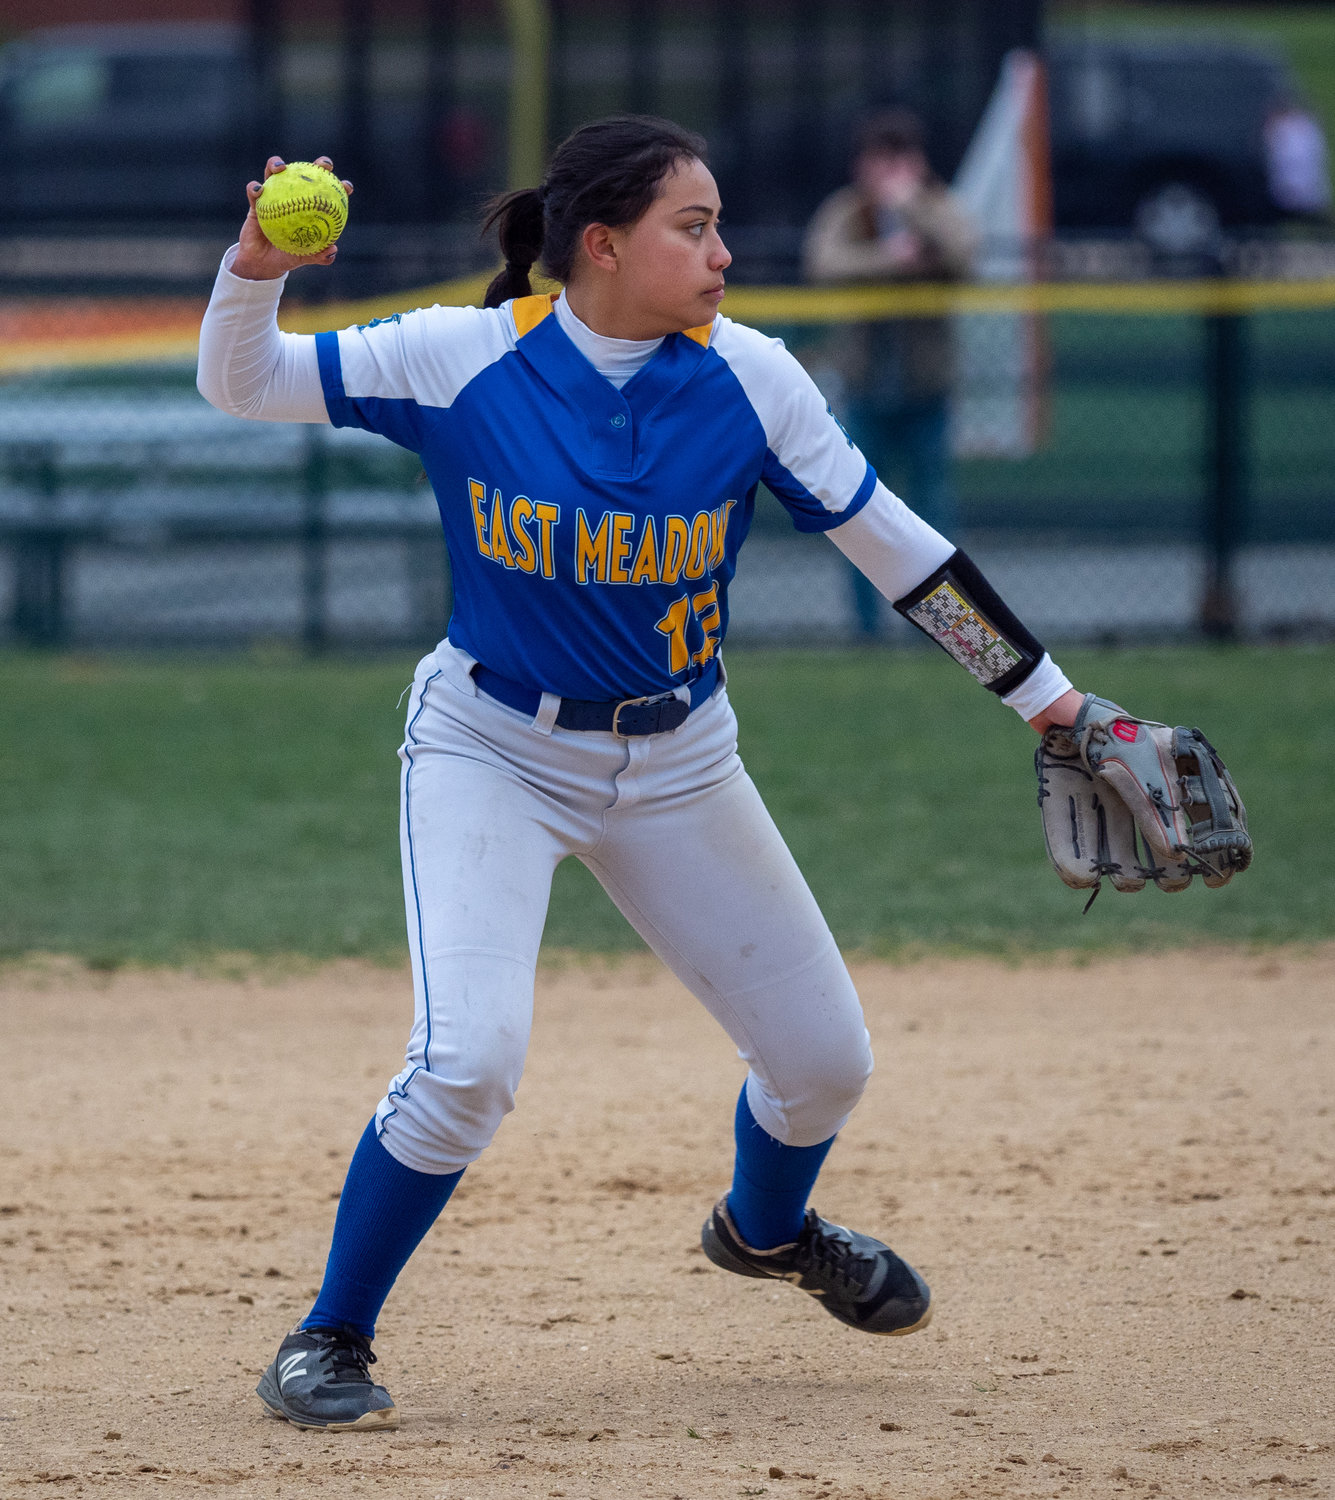 Junior Krystal Quizhpe anchors East Meadow’s defense from shortstop and had three hits in its April 5 loss at Carey.